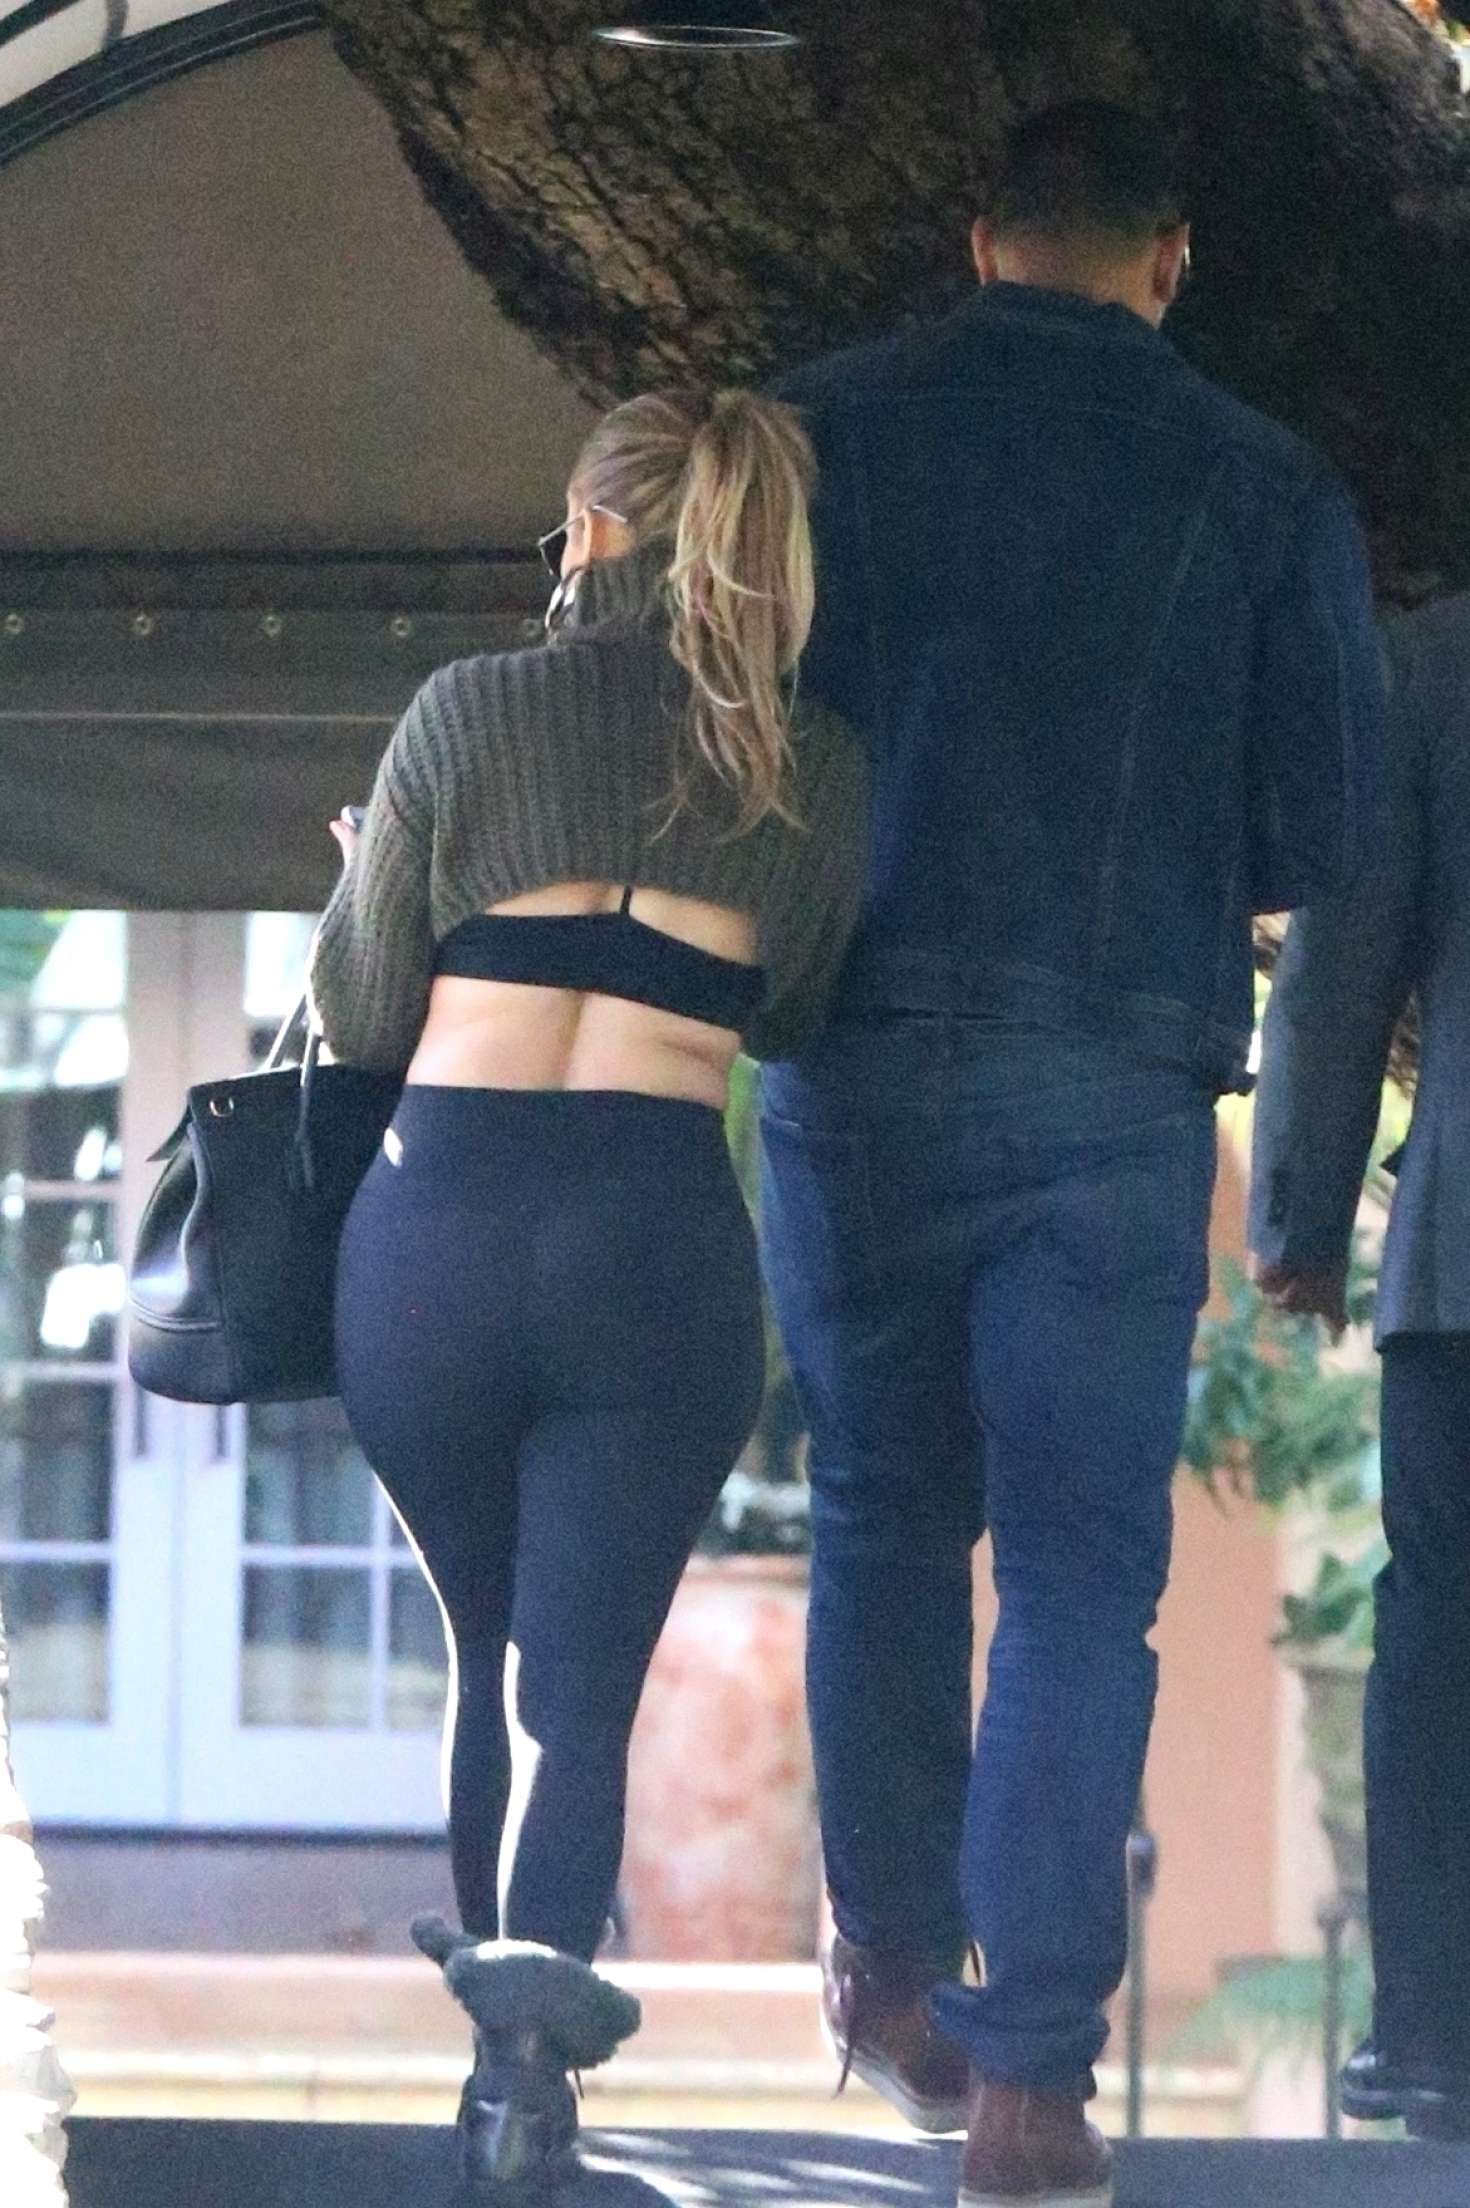 Jennifer Lopez Booty in Jeans while out in NY - SAWFIRST 